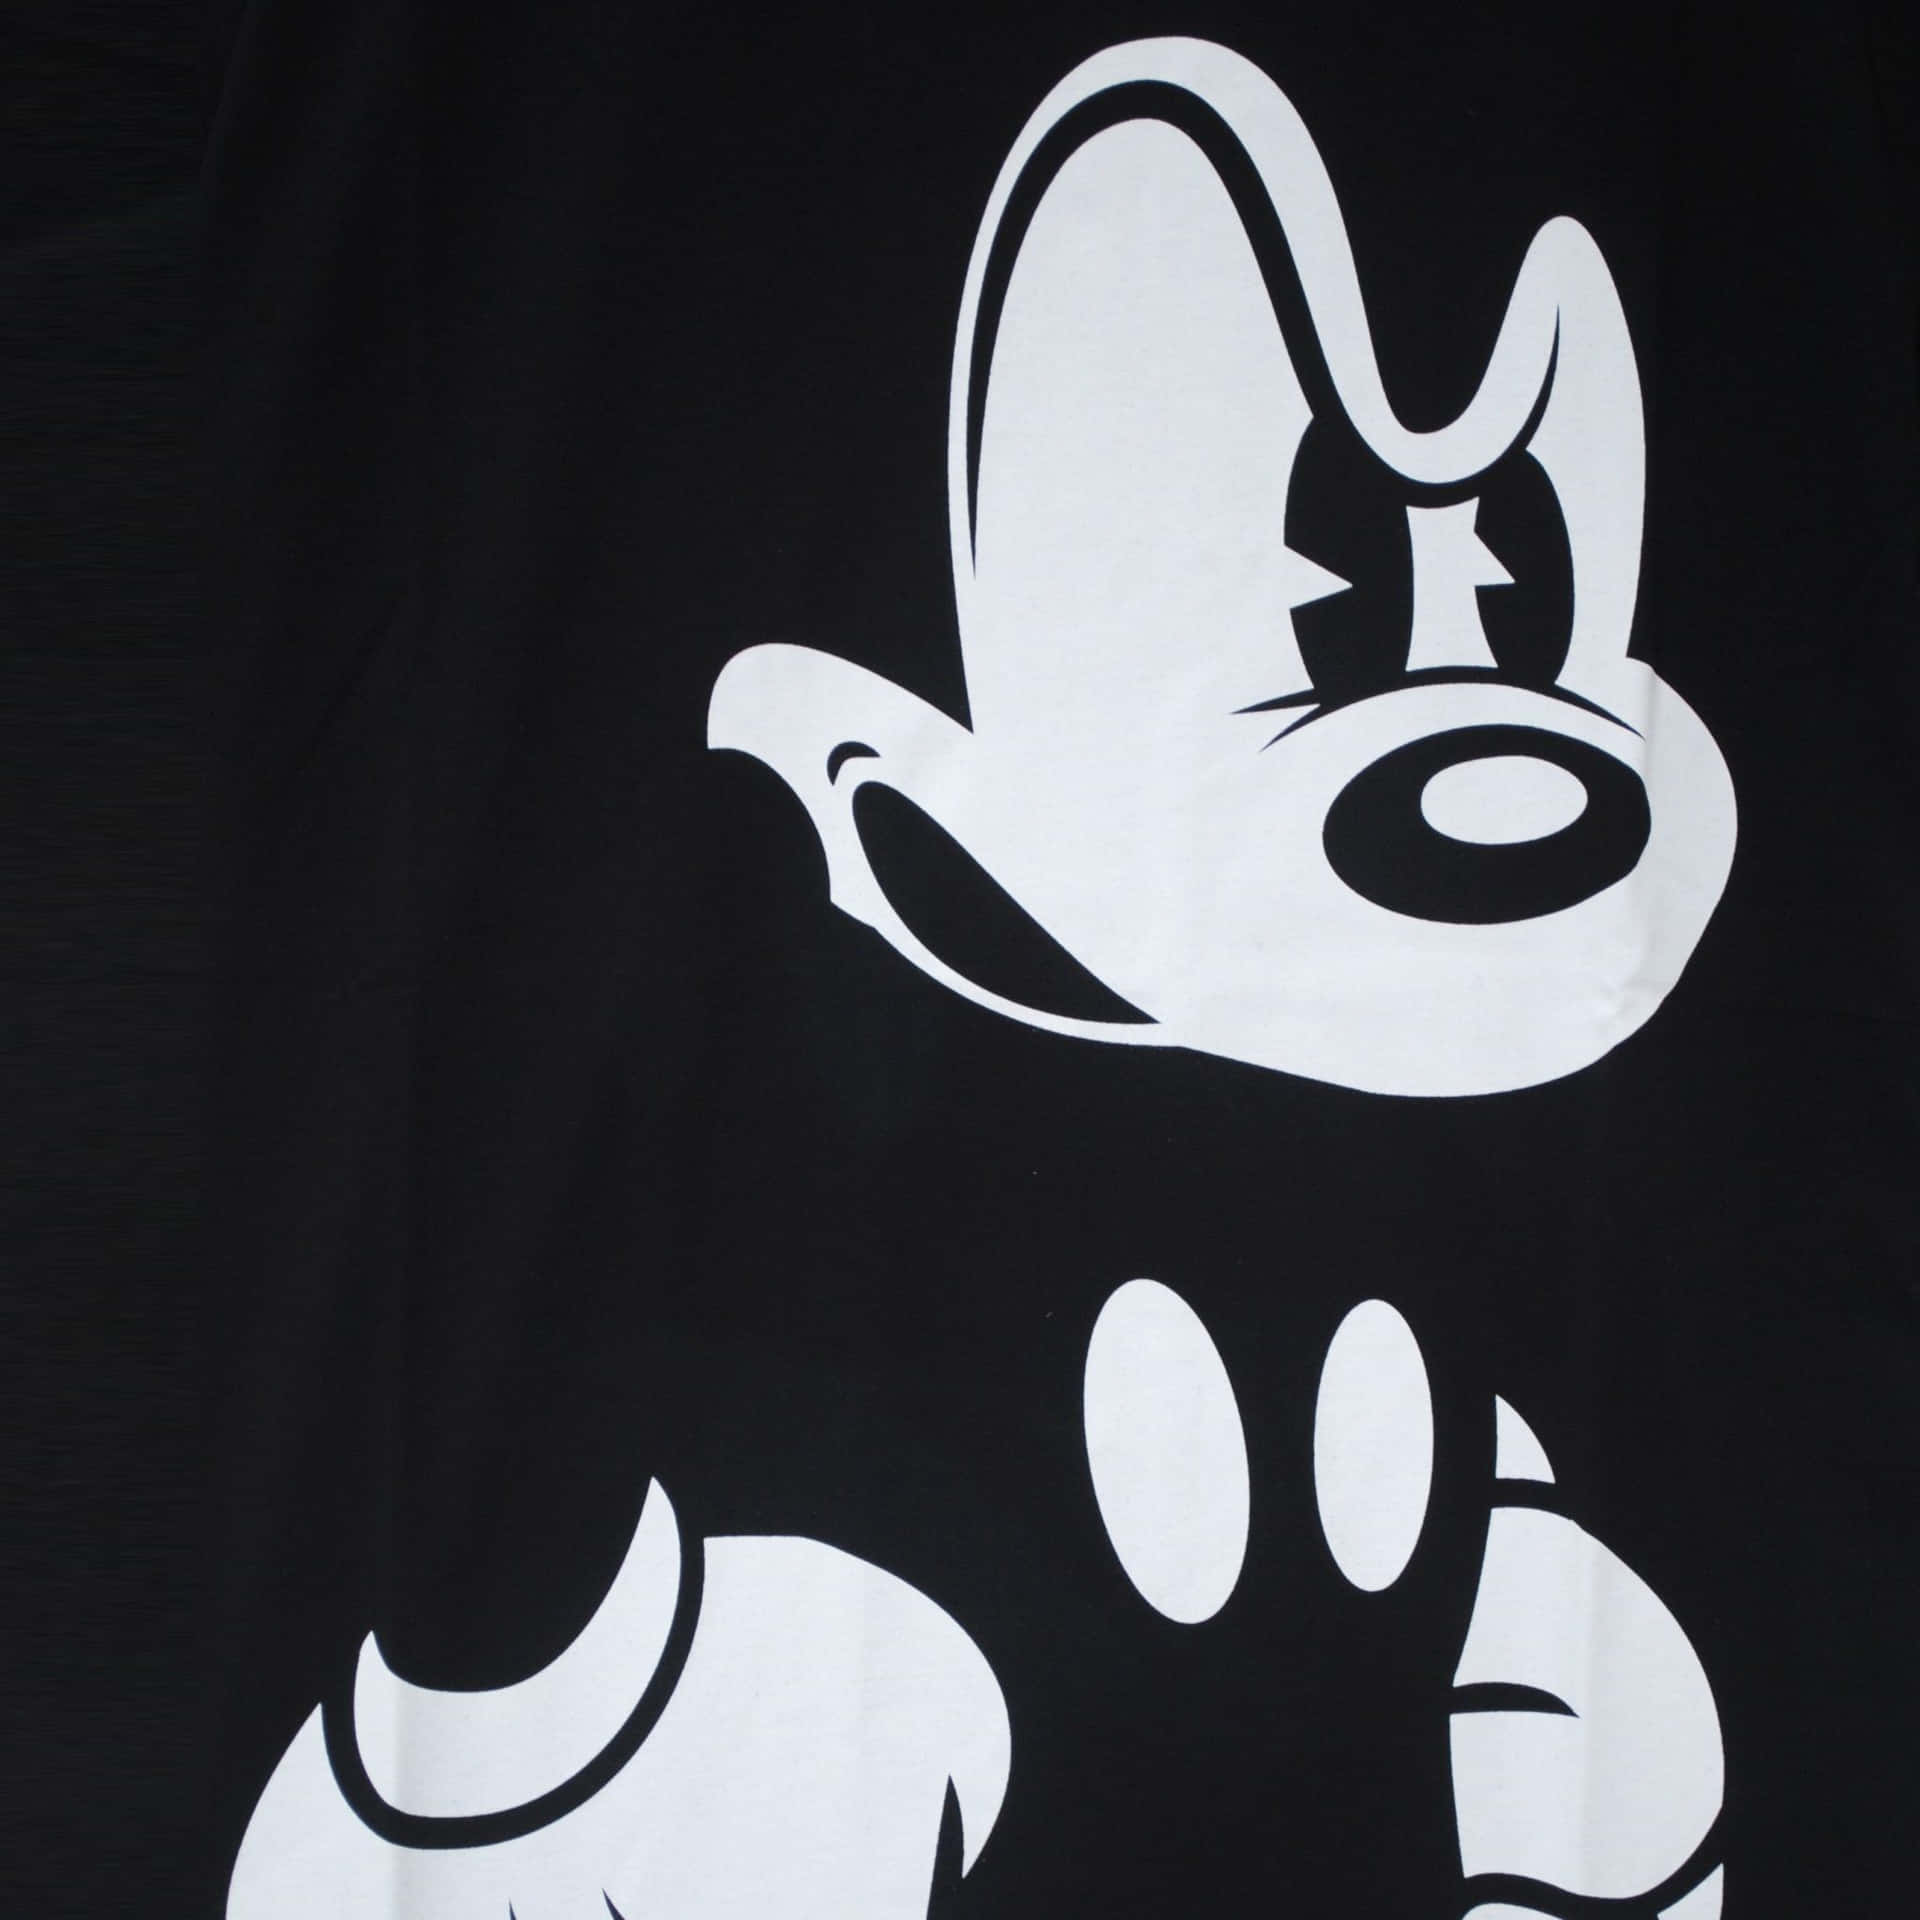 Get the Classic Look with the Black Mickey Mouse Phone Wallpaper